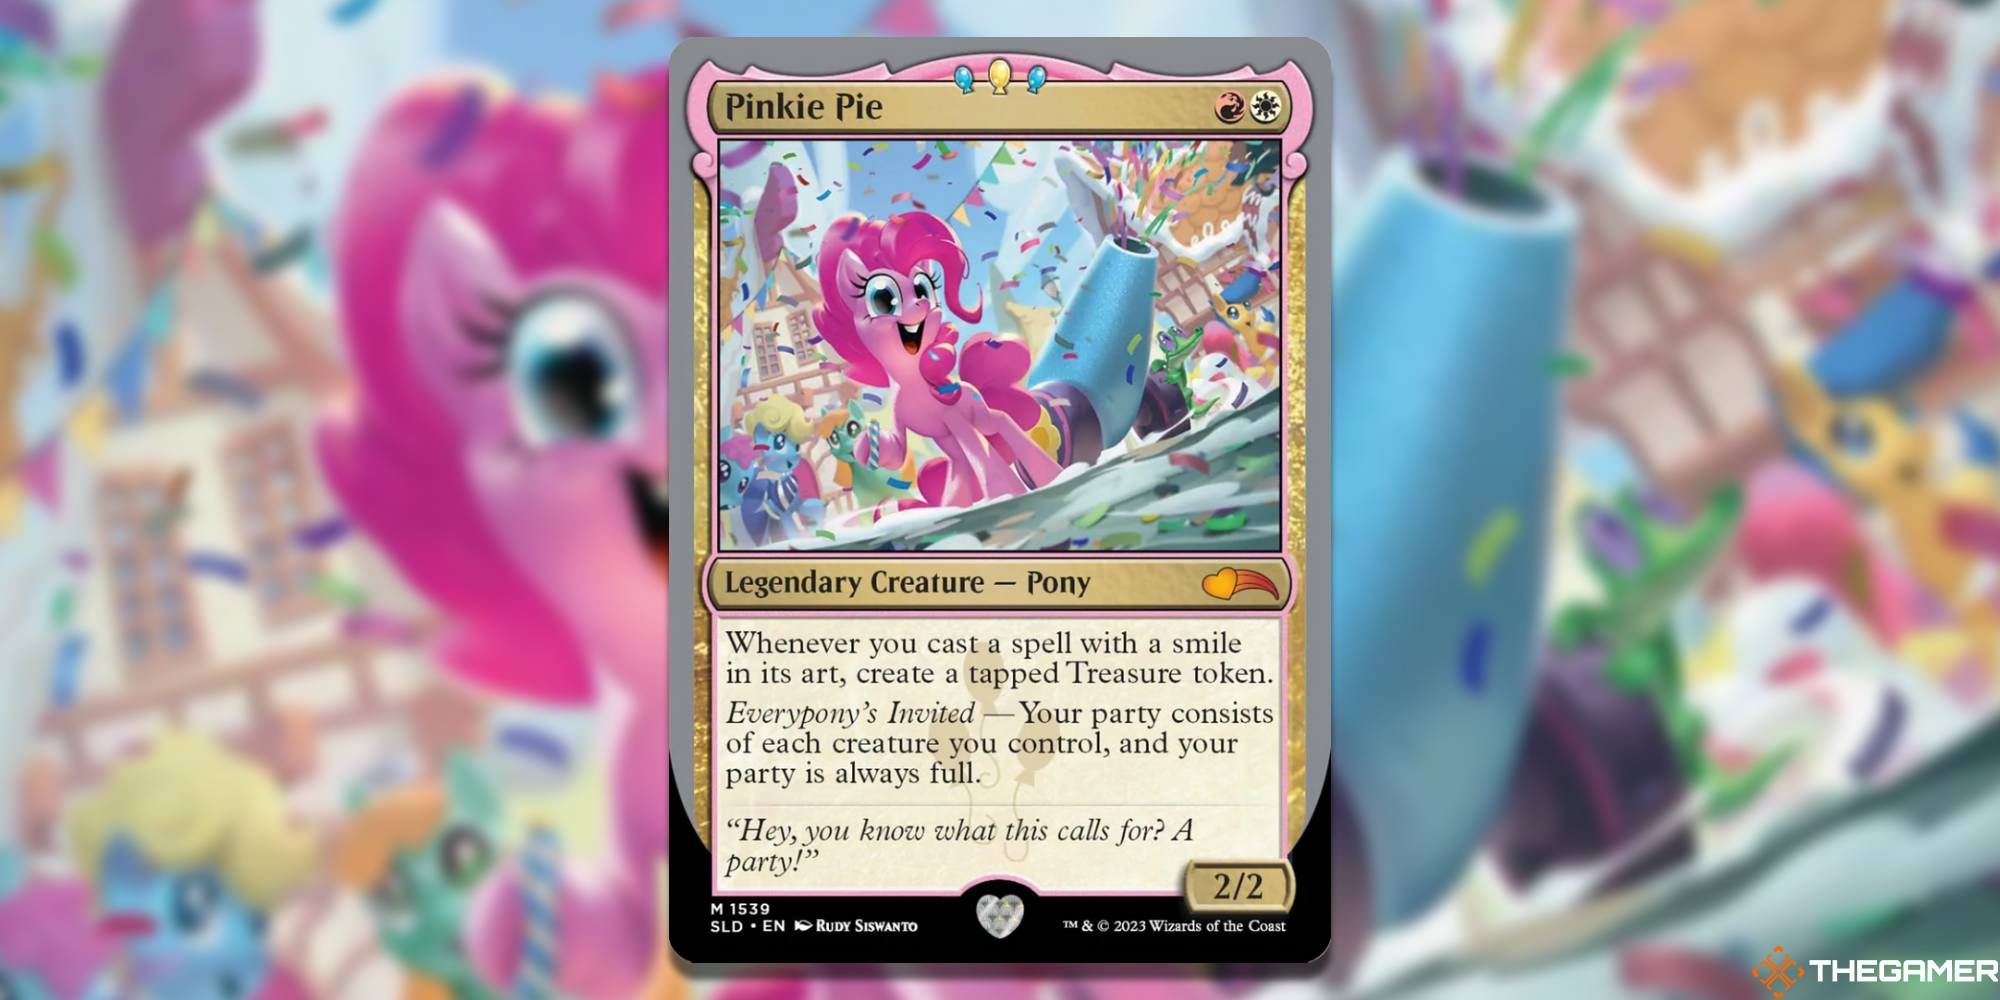 Magic: The Gathering's monsters look wild next to My Little Pony